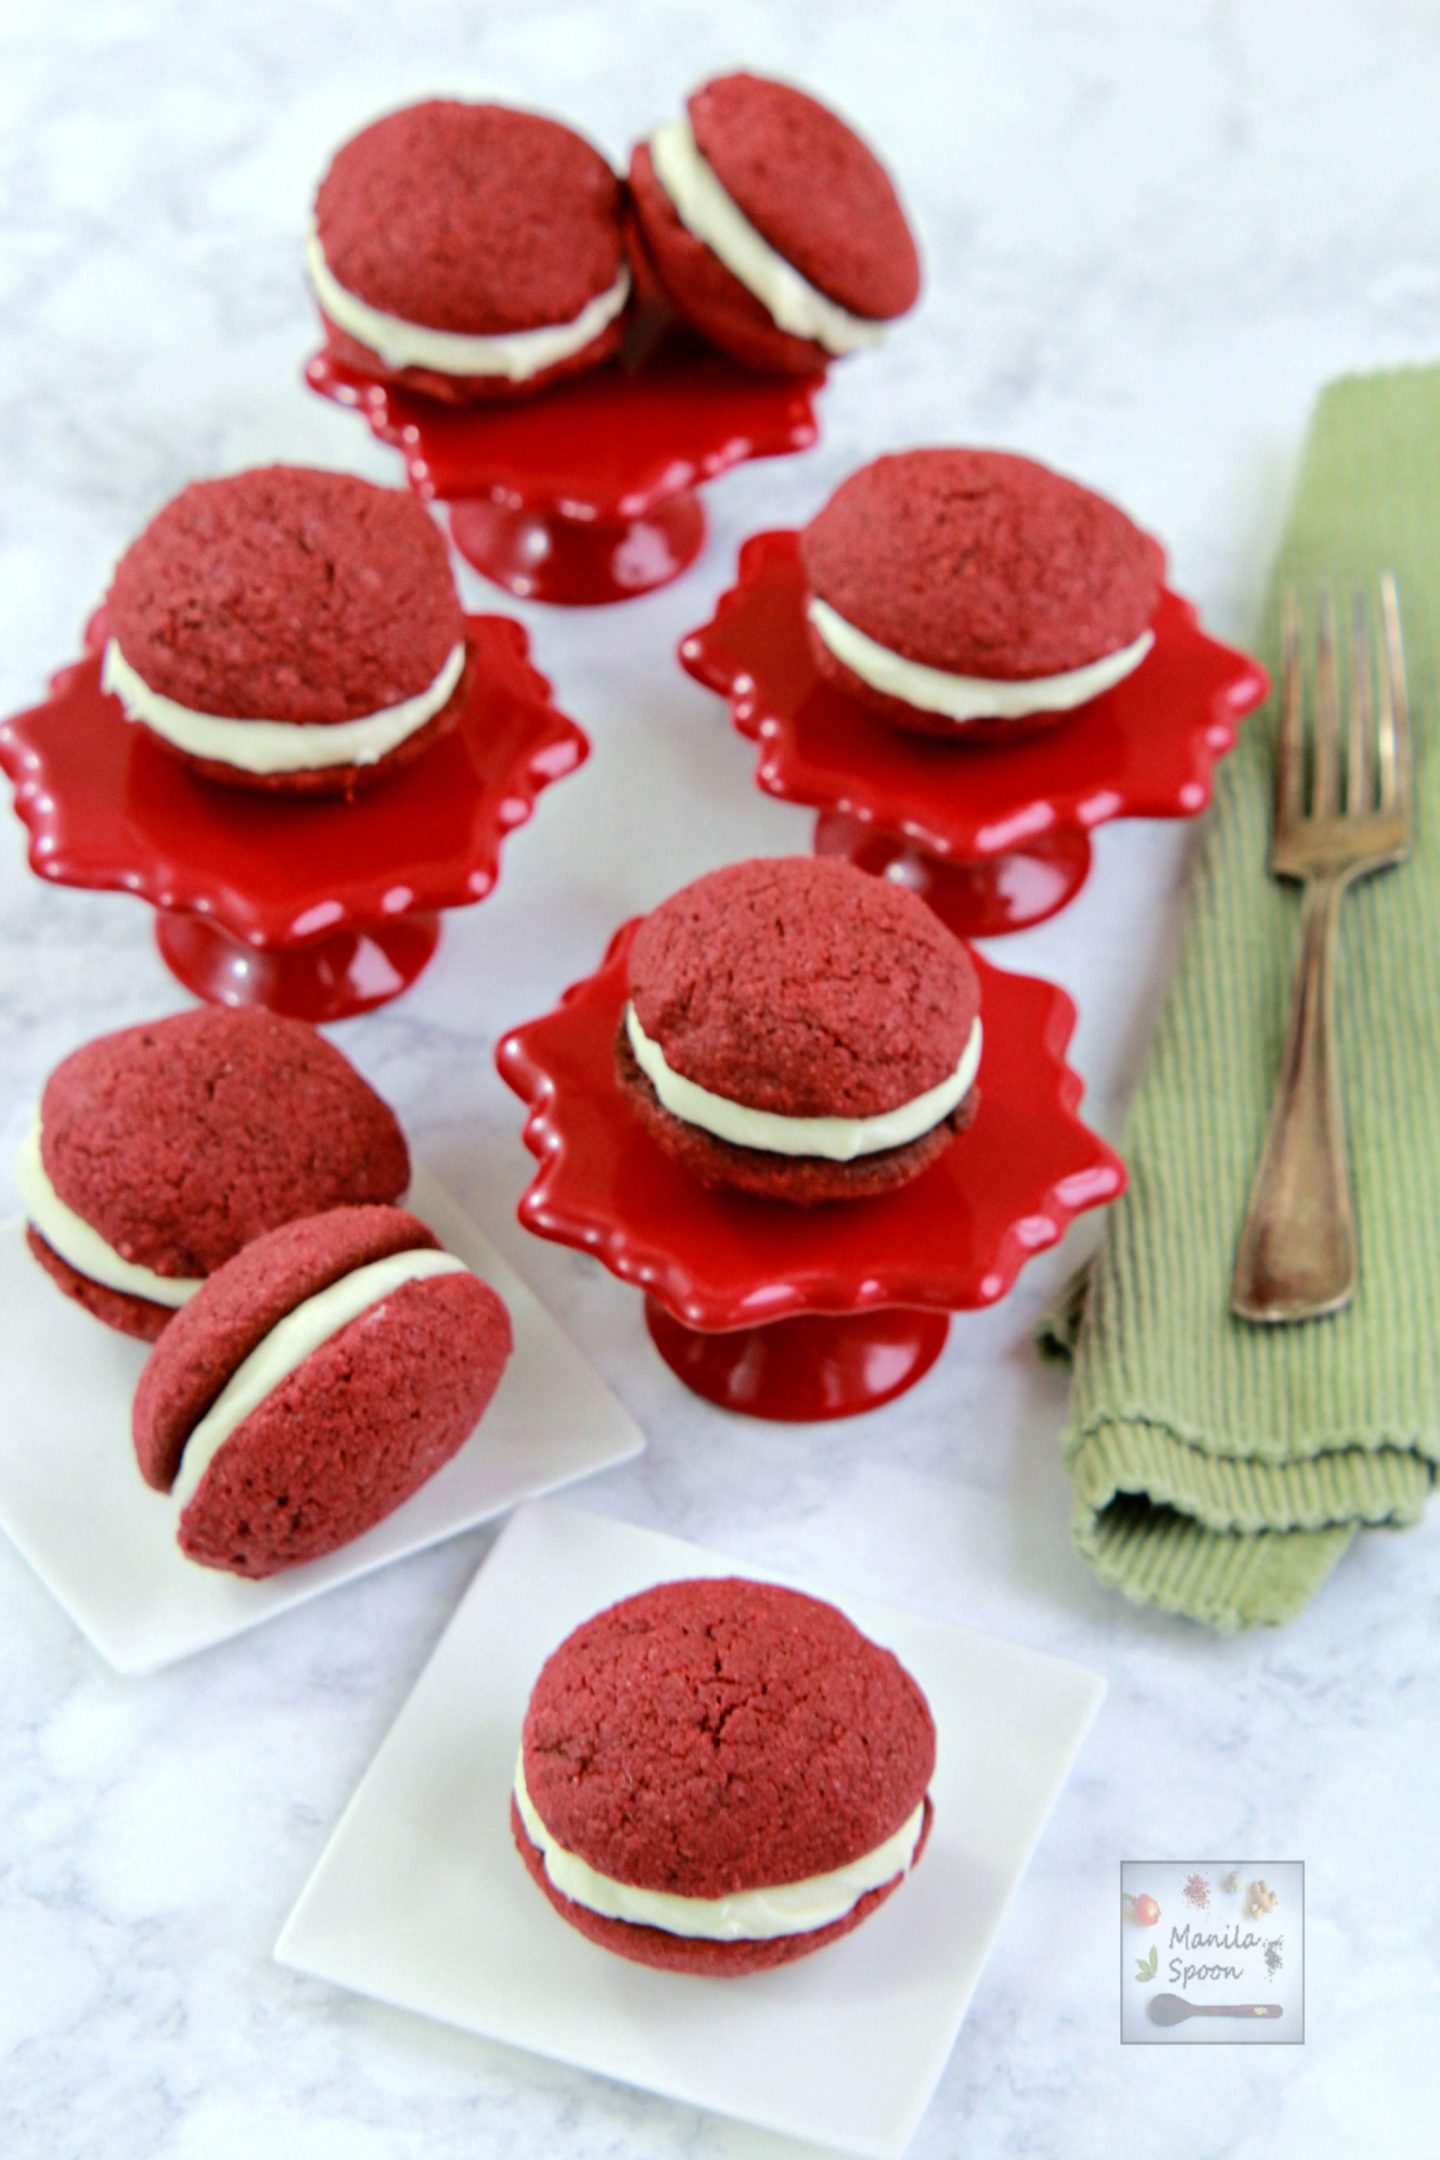 Perfectly delicious sweet treat for Valentine's Day - Red Velvet Whoopie Pies!! Easy to make and looks impressive, too!